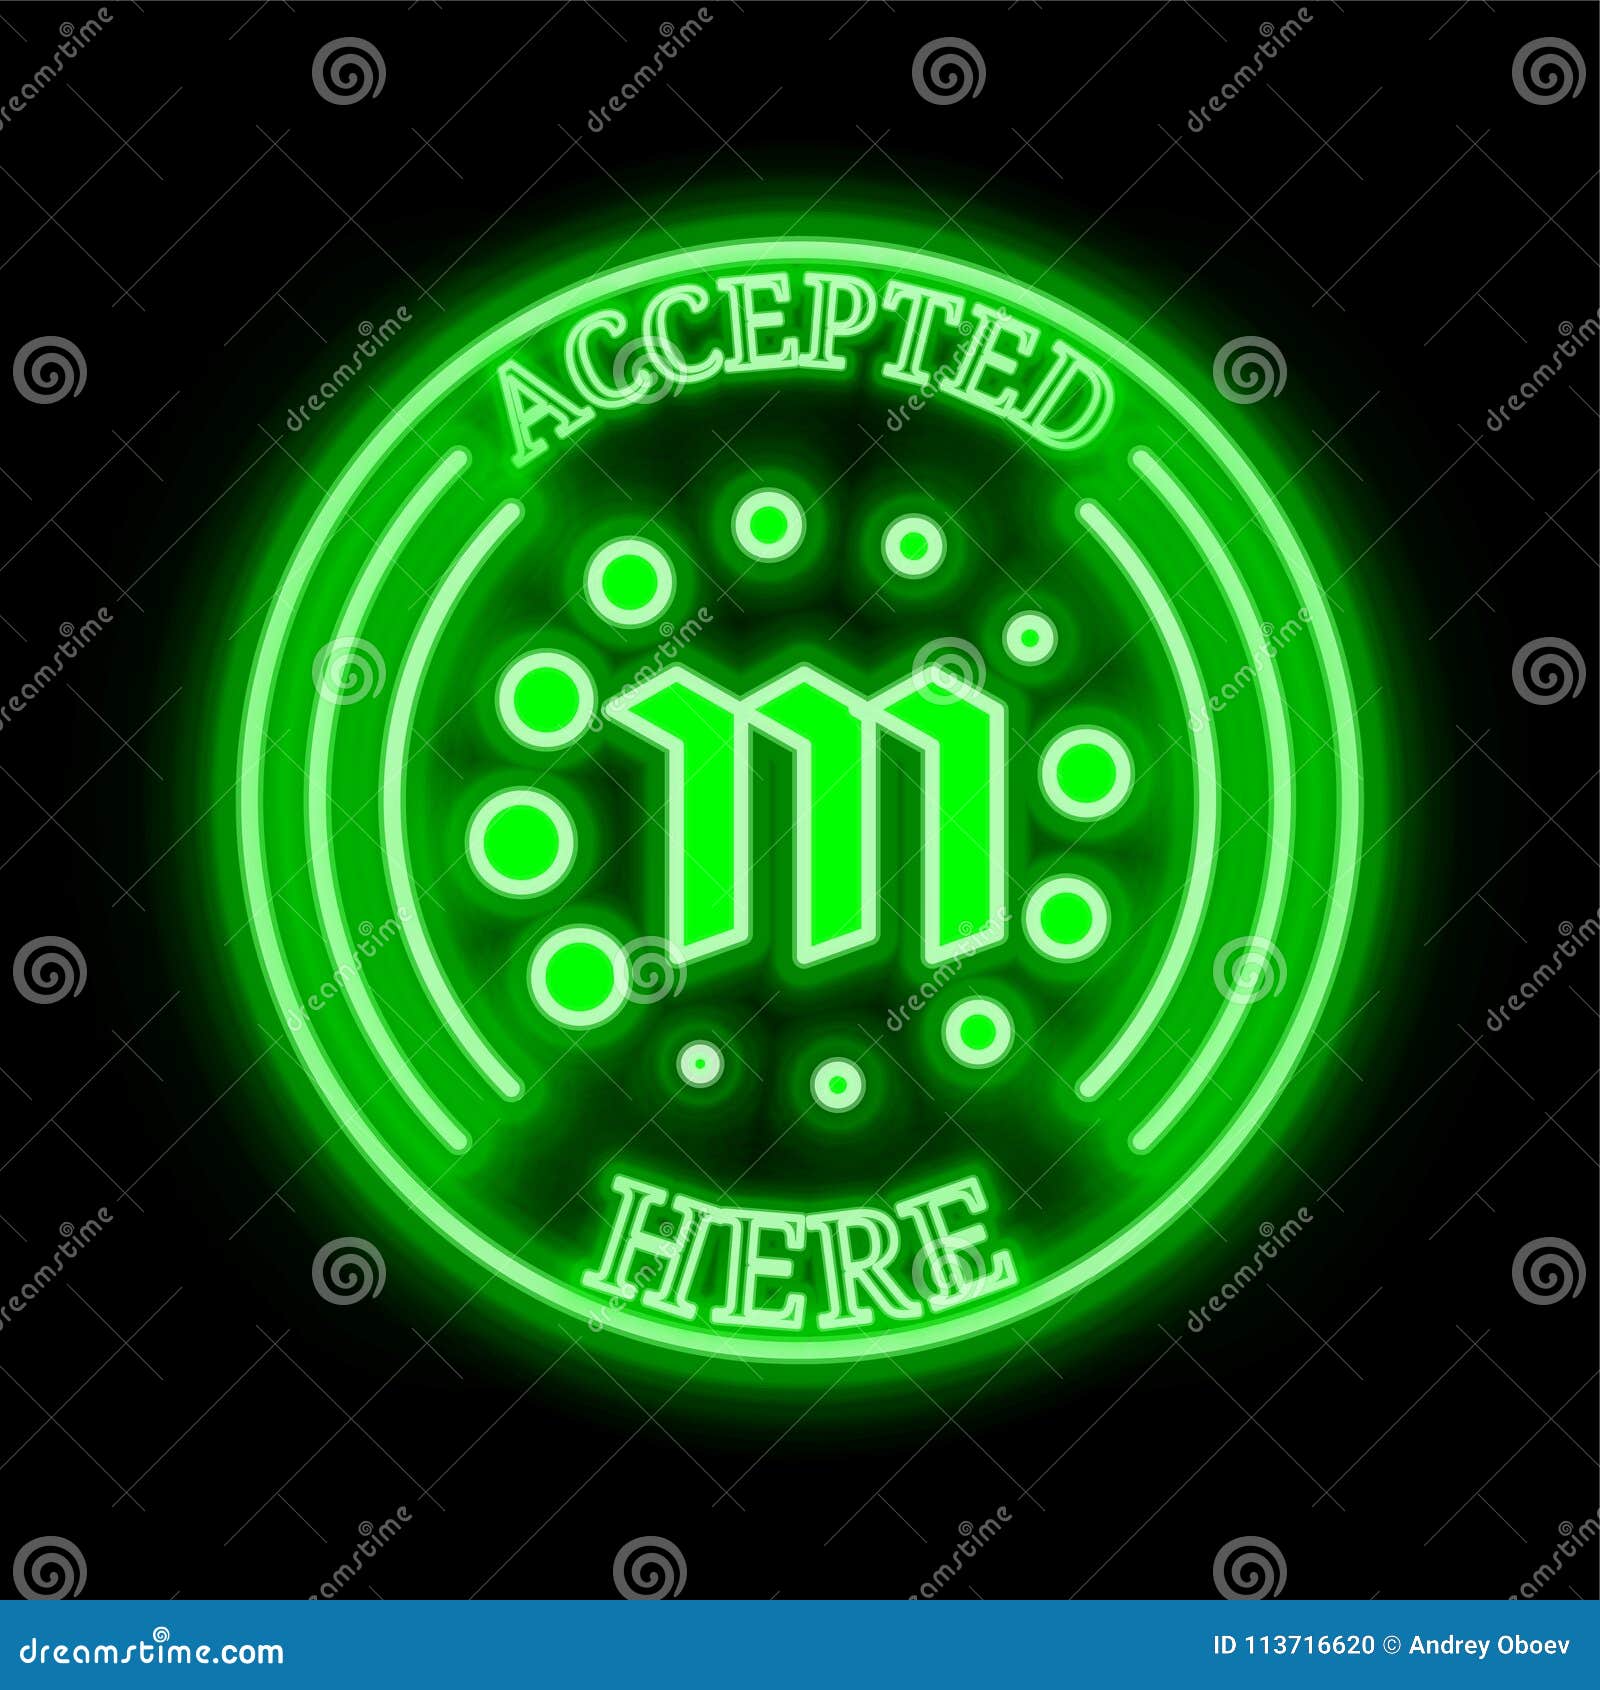 Metaverse Etp Etp Accepted Here Sign Stock Vector Illustration Of Metaverseetpetp Digital 113716620 History, trading idea, where to buy that helps price prediction. dreamstime com